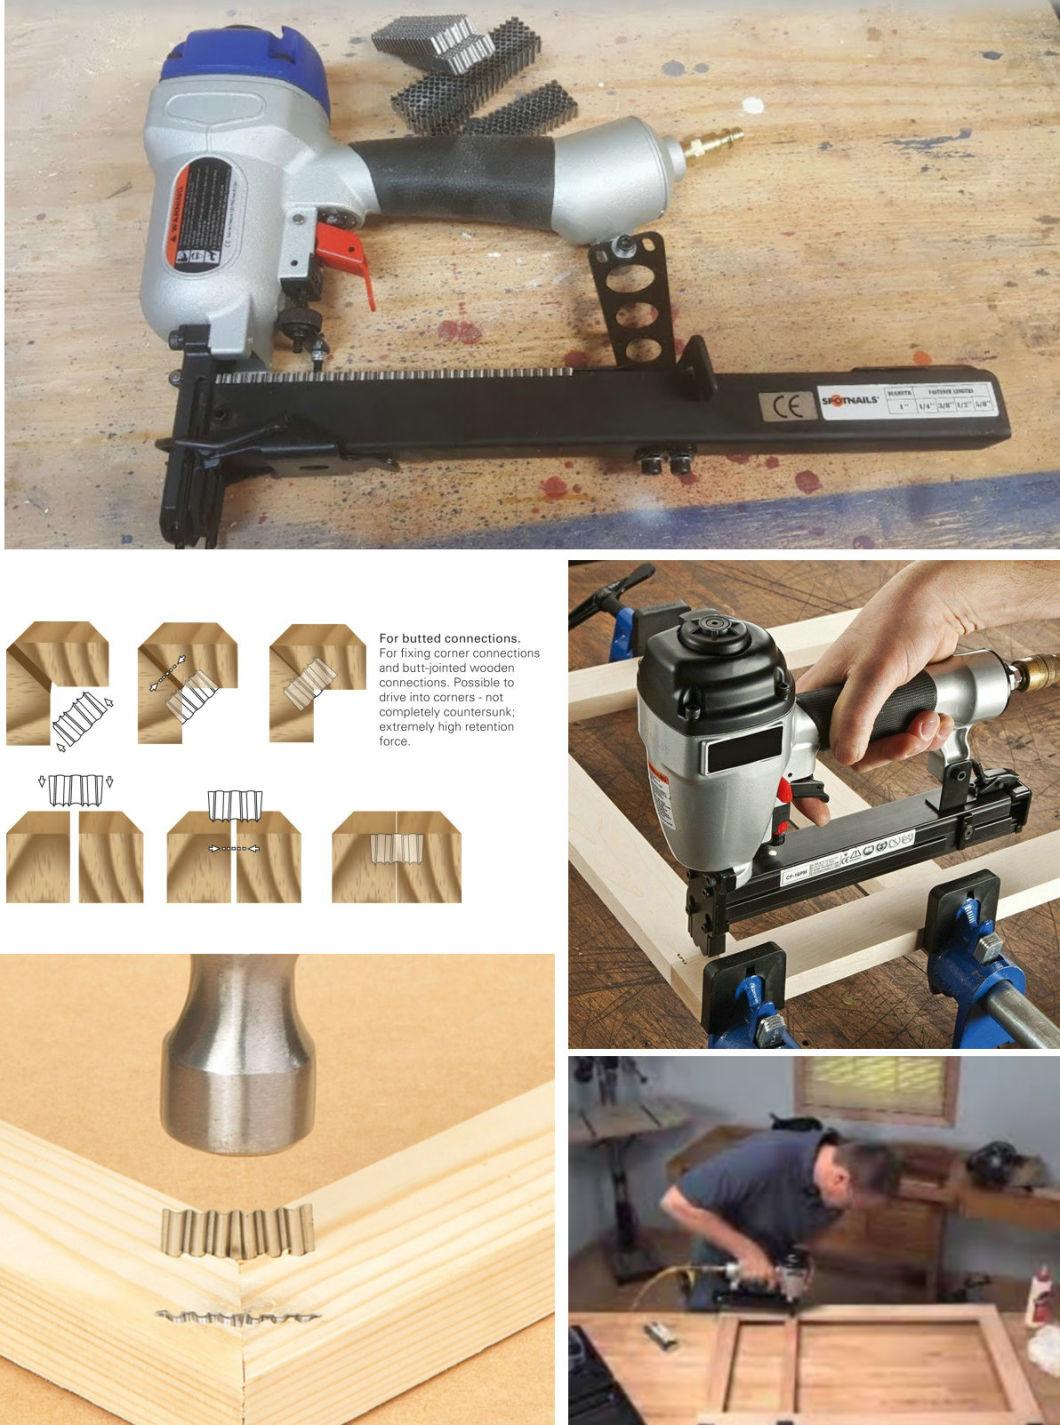 Three Corrugated Fasteners as Joiner for Furnituring